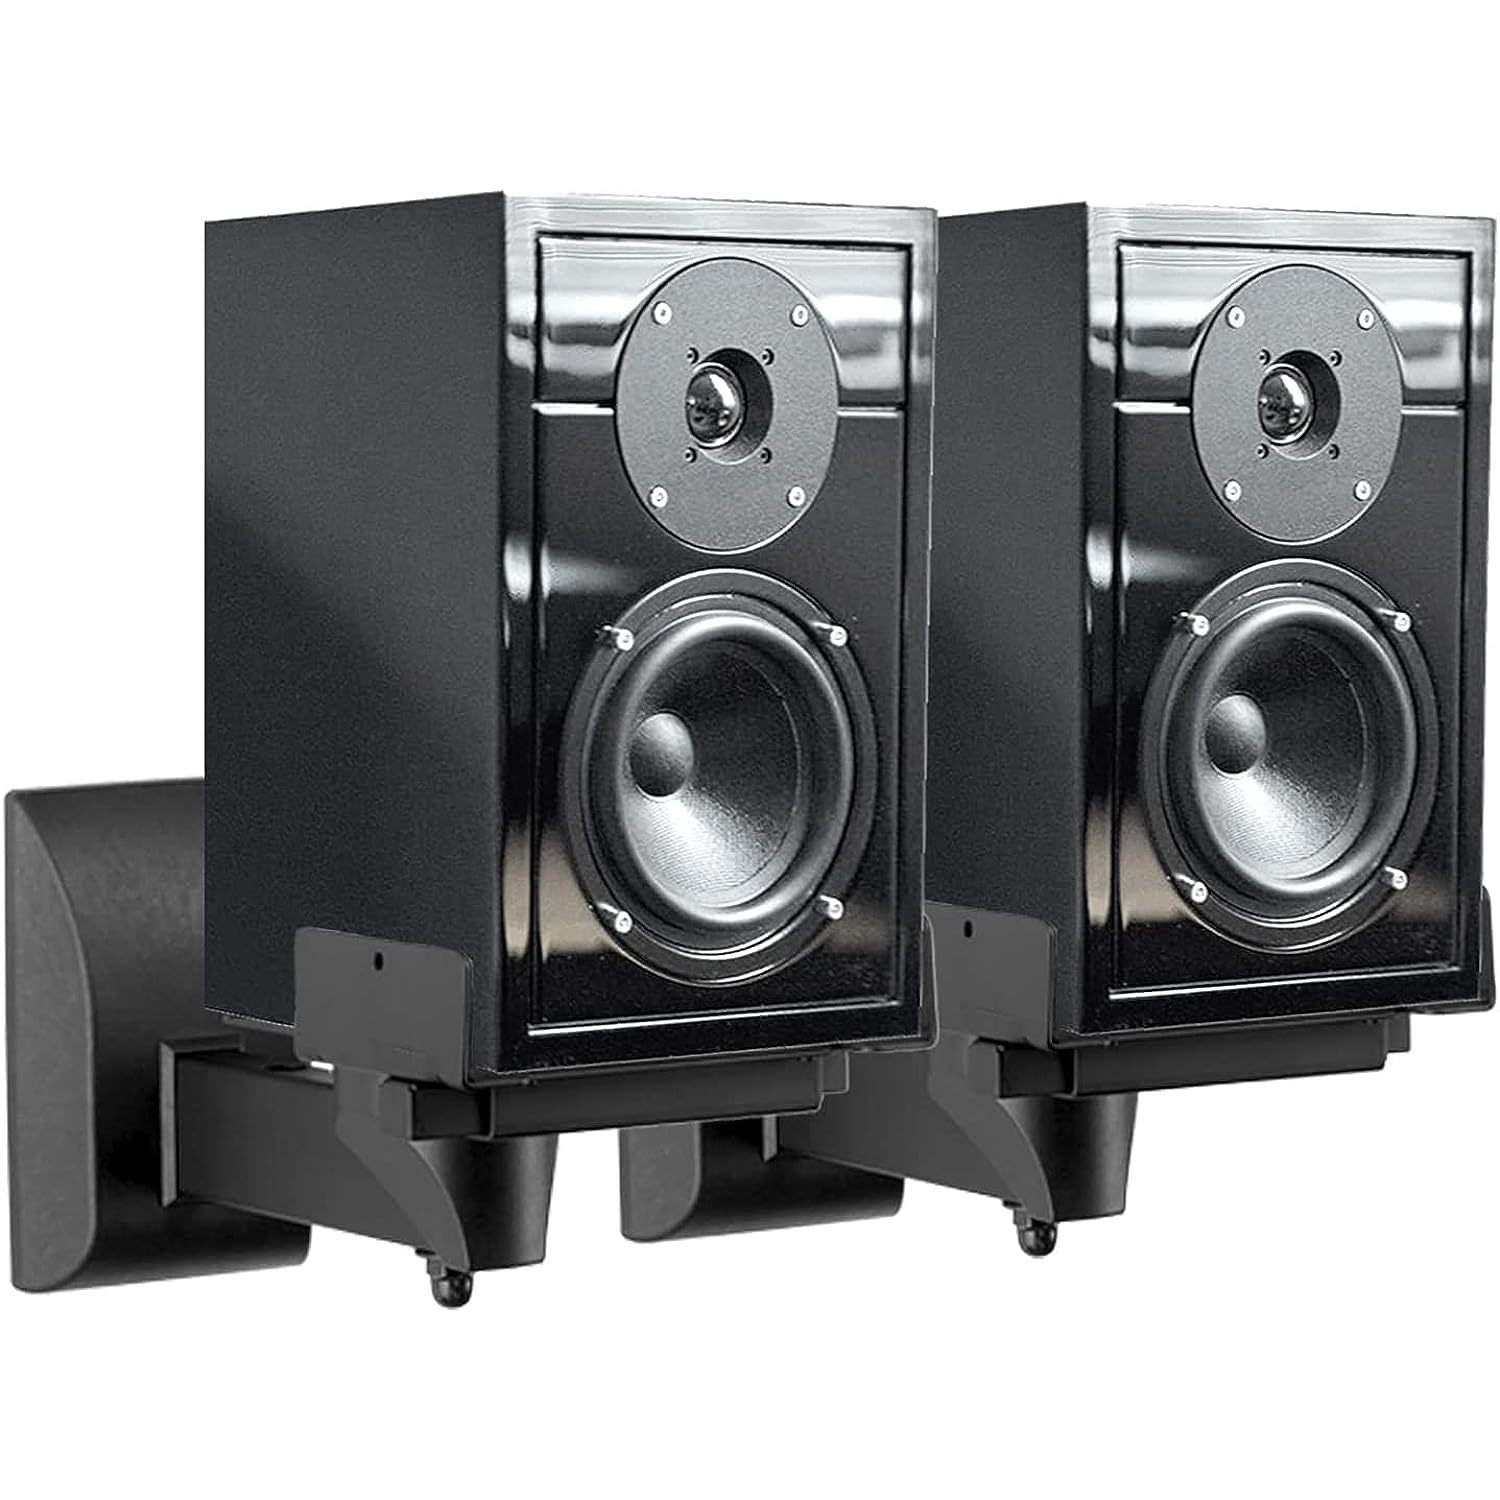 Primary image for Speaker Wall Mounts, Dual Speaker Stands For Surround Sound Speakers, Universal 